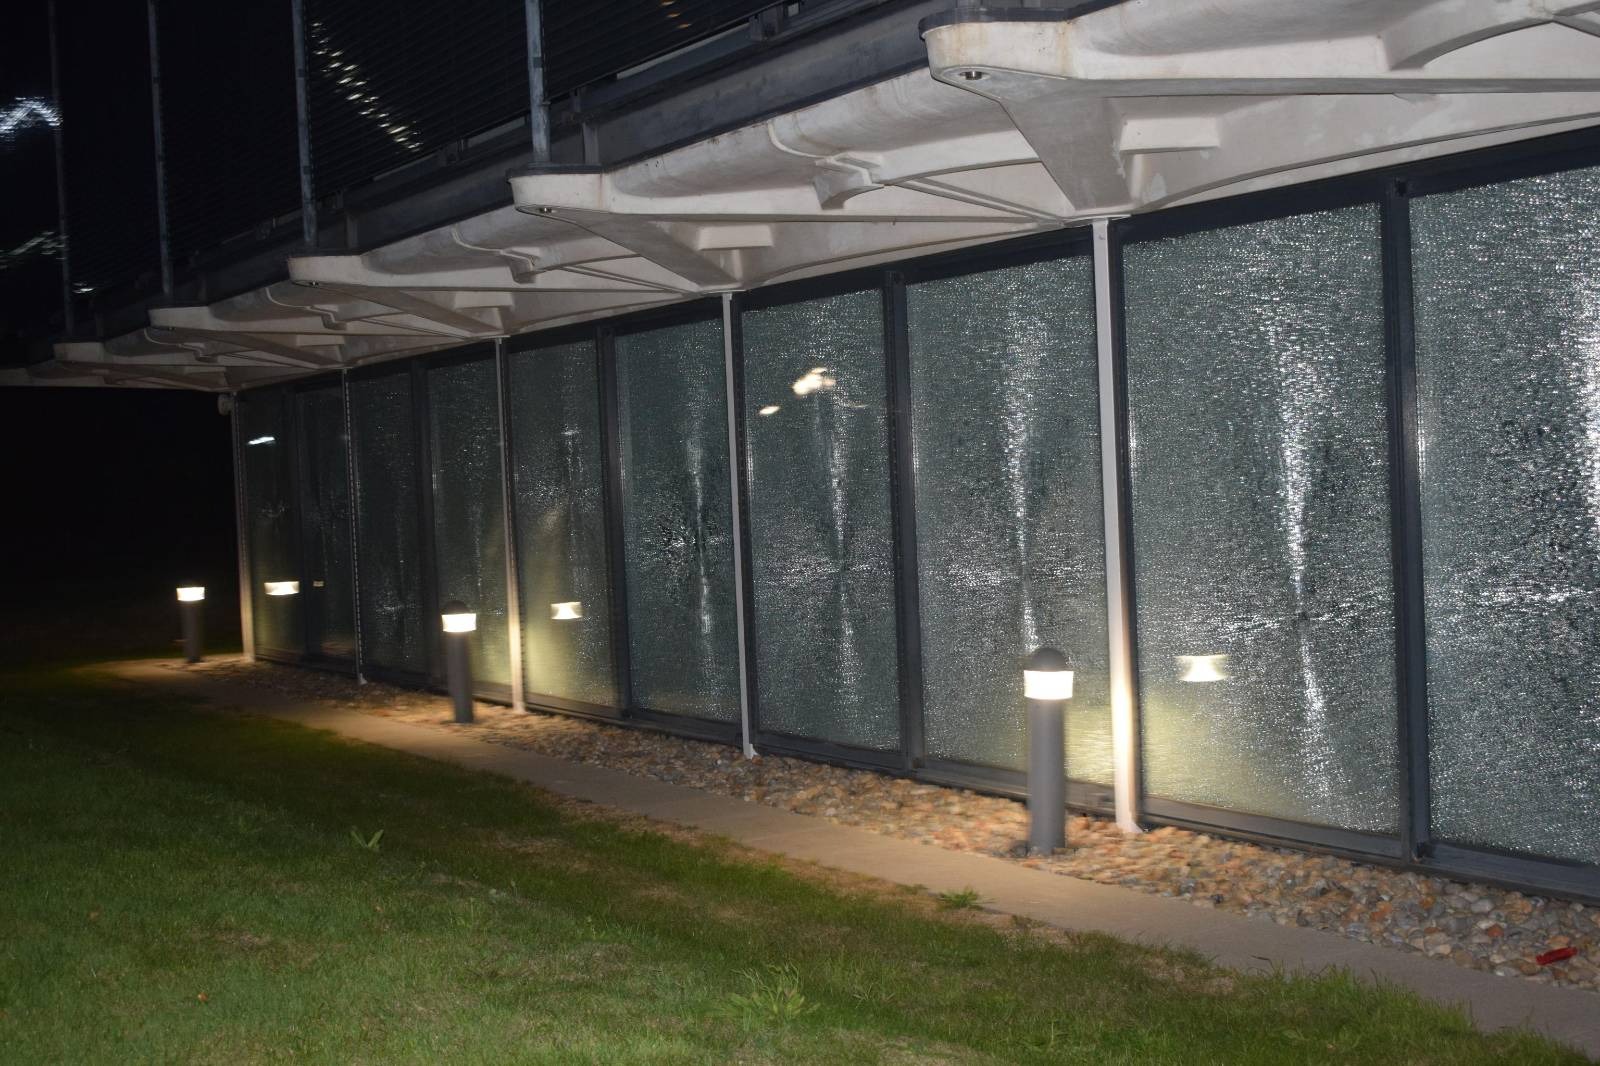 10/10/2022: All front windows broken at Schlumberger’s Cambridge fossil fuel research centre